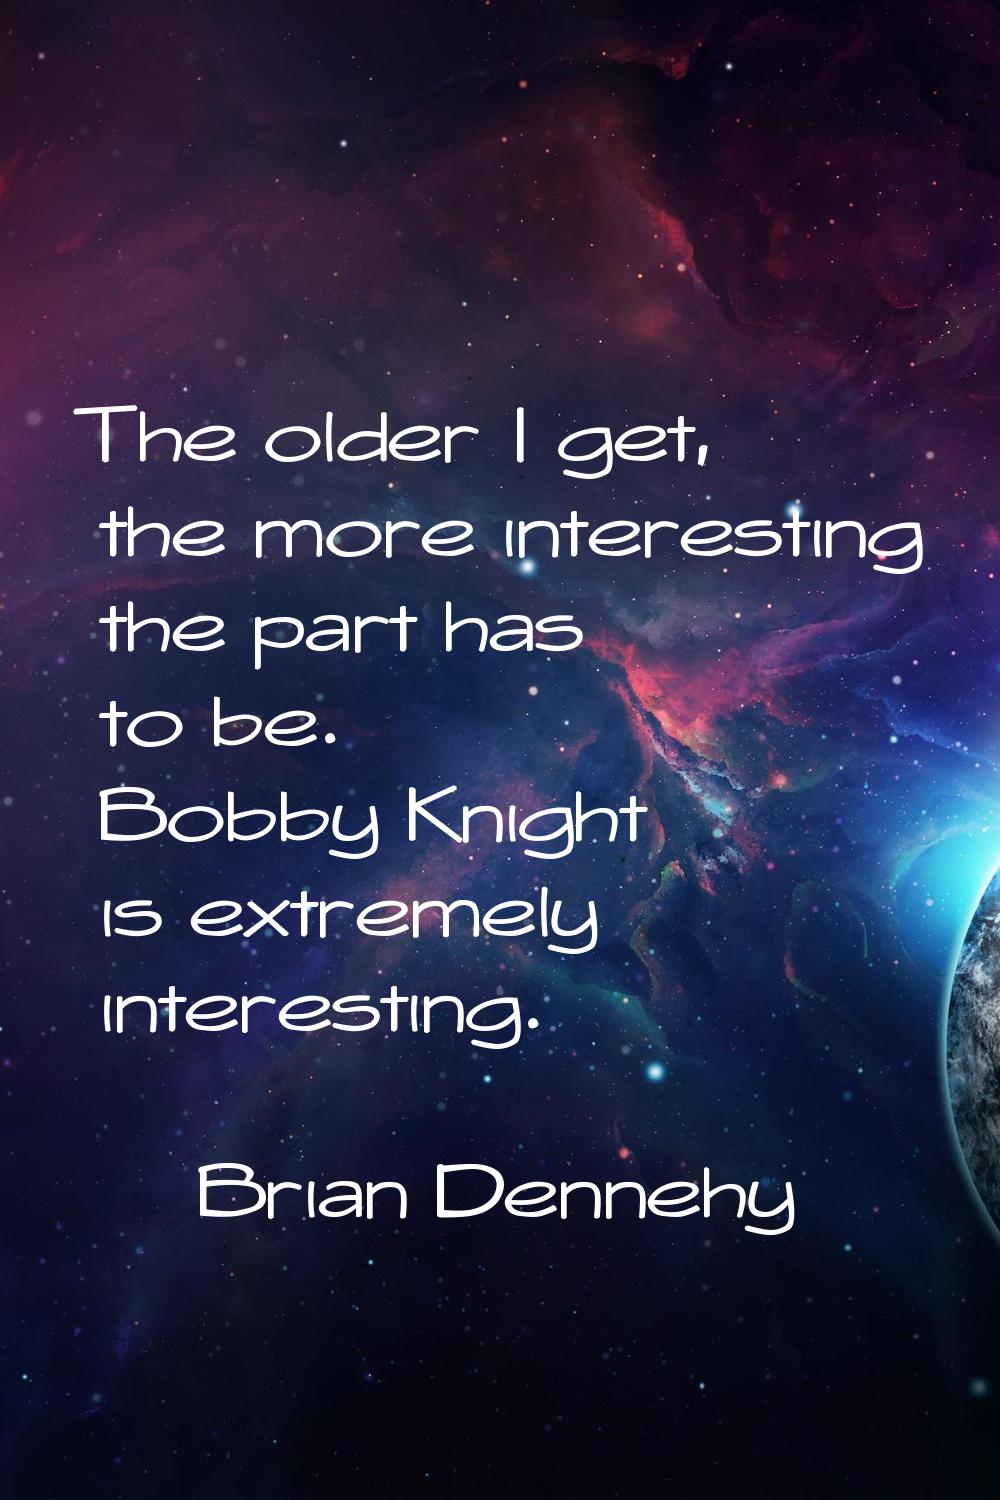 The older I get, the more interesting the part has to be. Bobby Knight is extremely interesting.